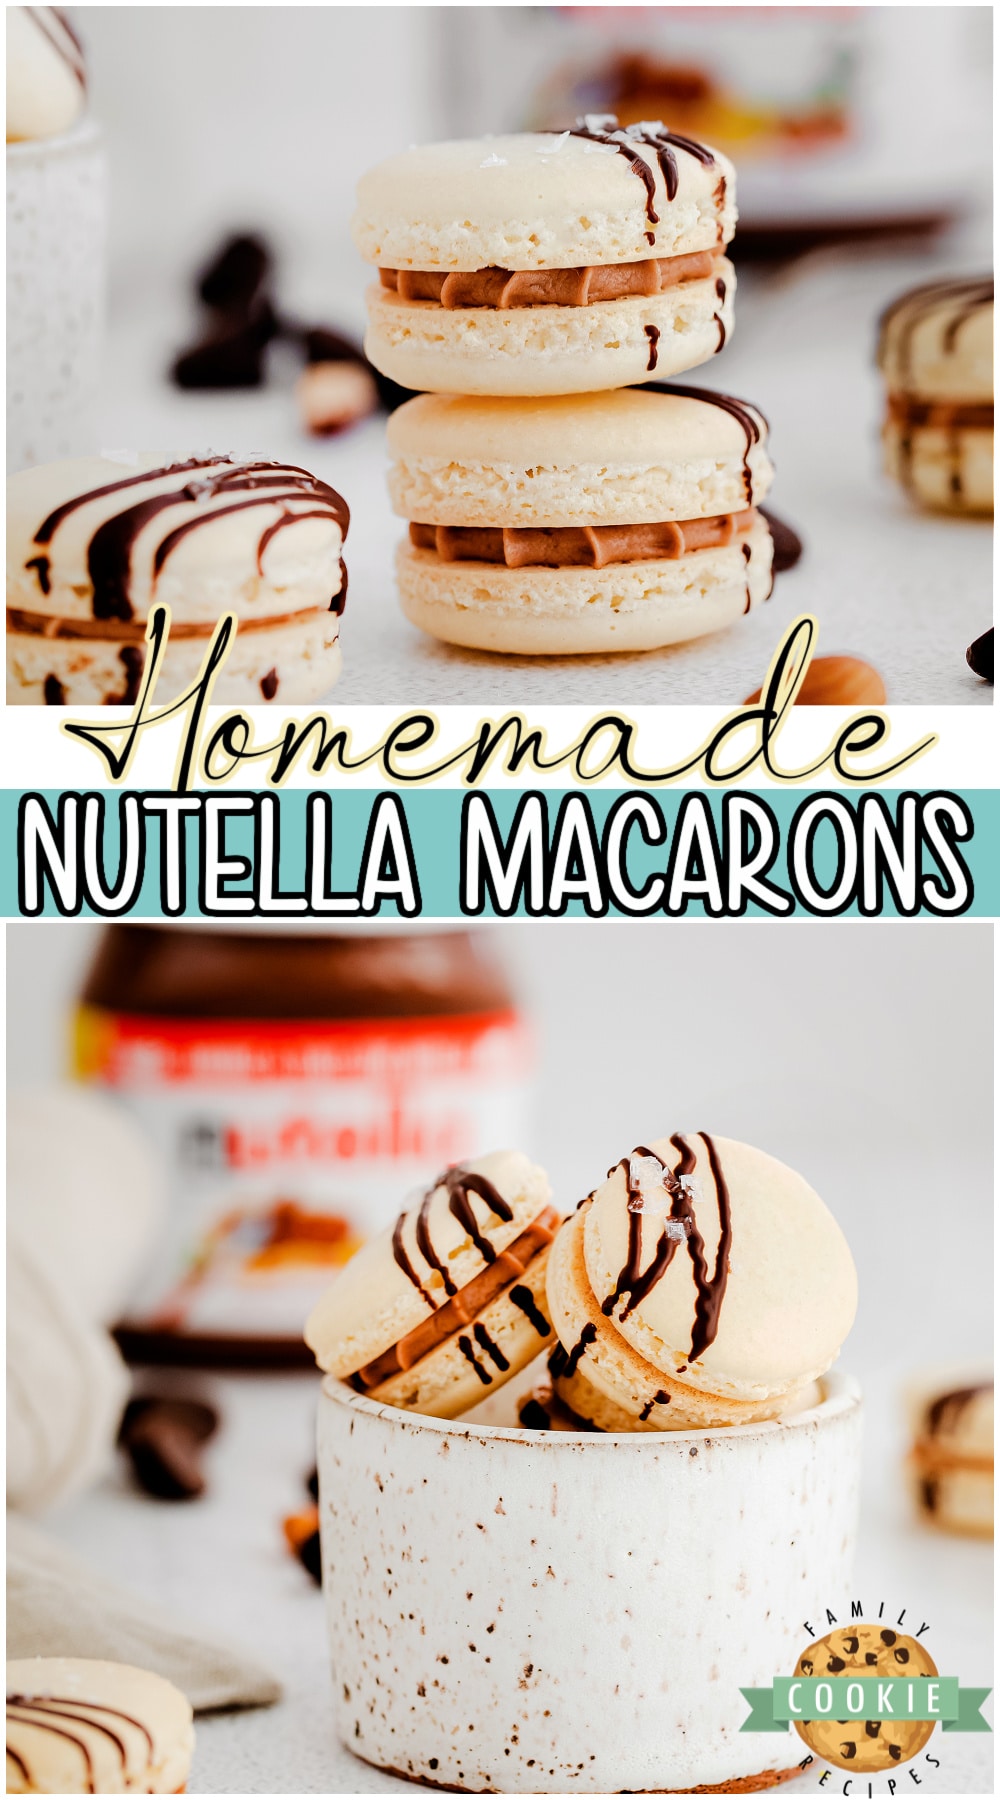 Nutella macaron recipe made from scratch & sure to impress! Delicate French cookies filled with a Nutella cream & drizzled with chocolate! 